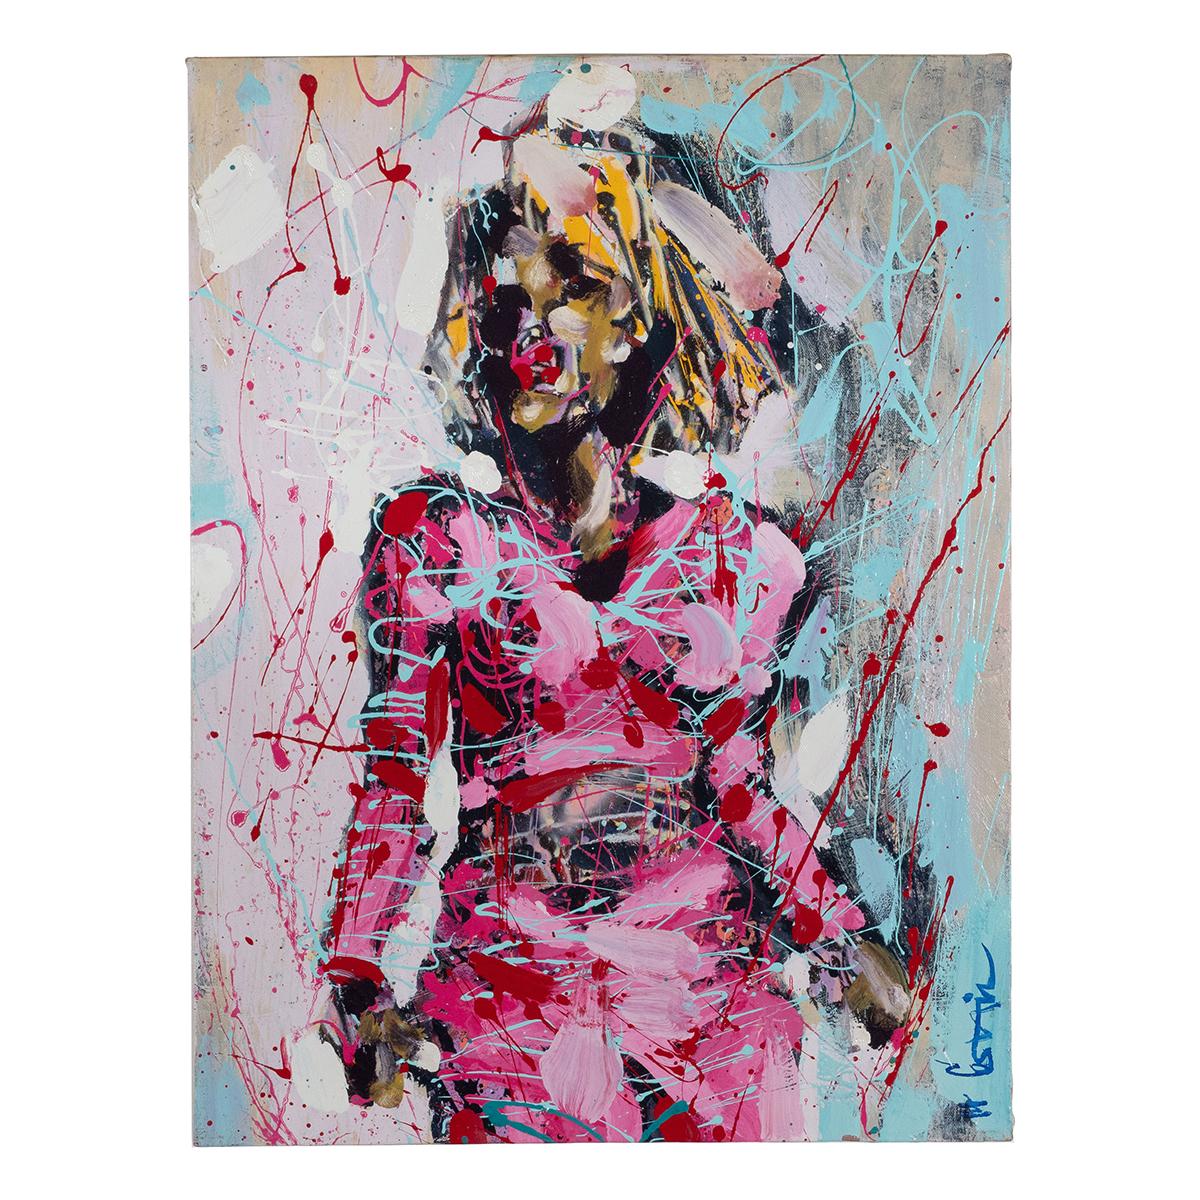 Modern impressionistic portrait of a woman in pink by Costain. Oil on canvas.